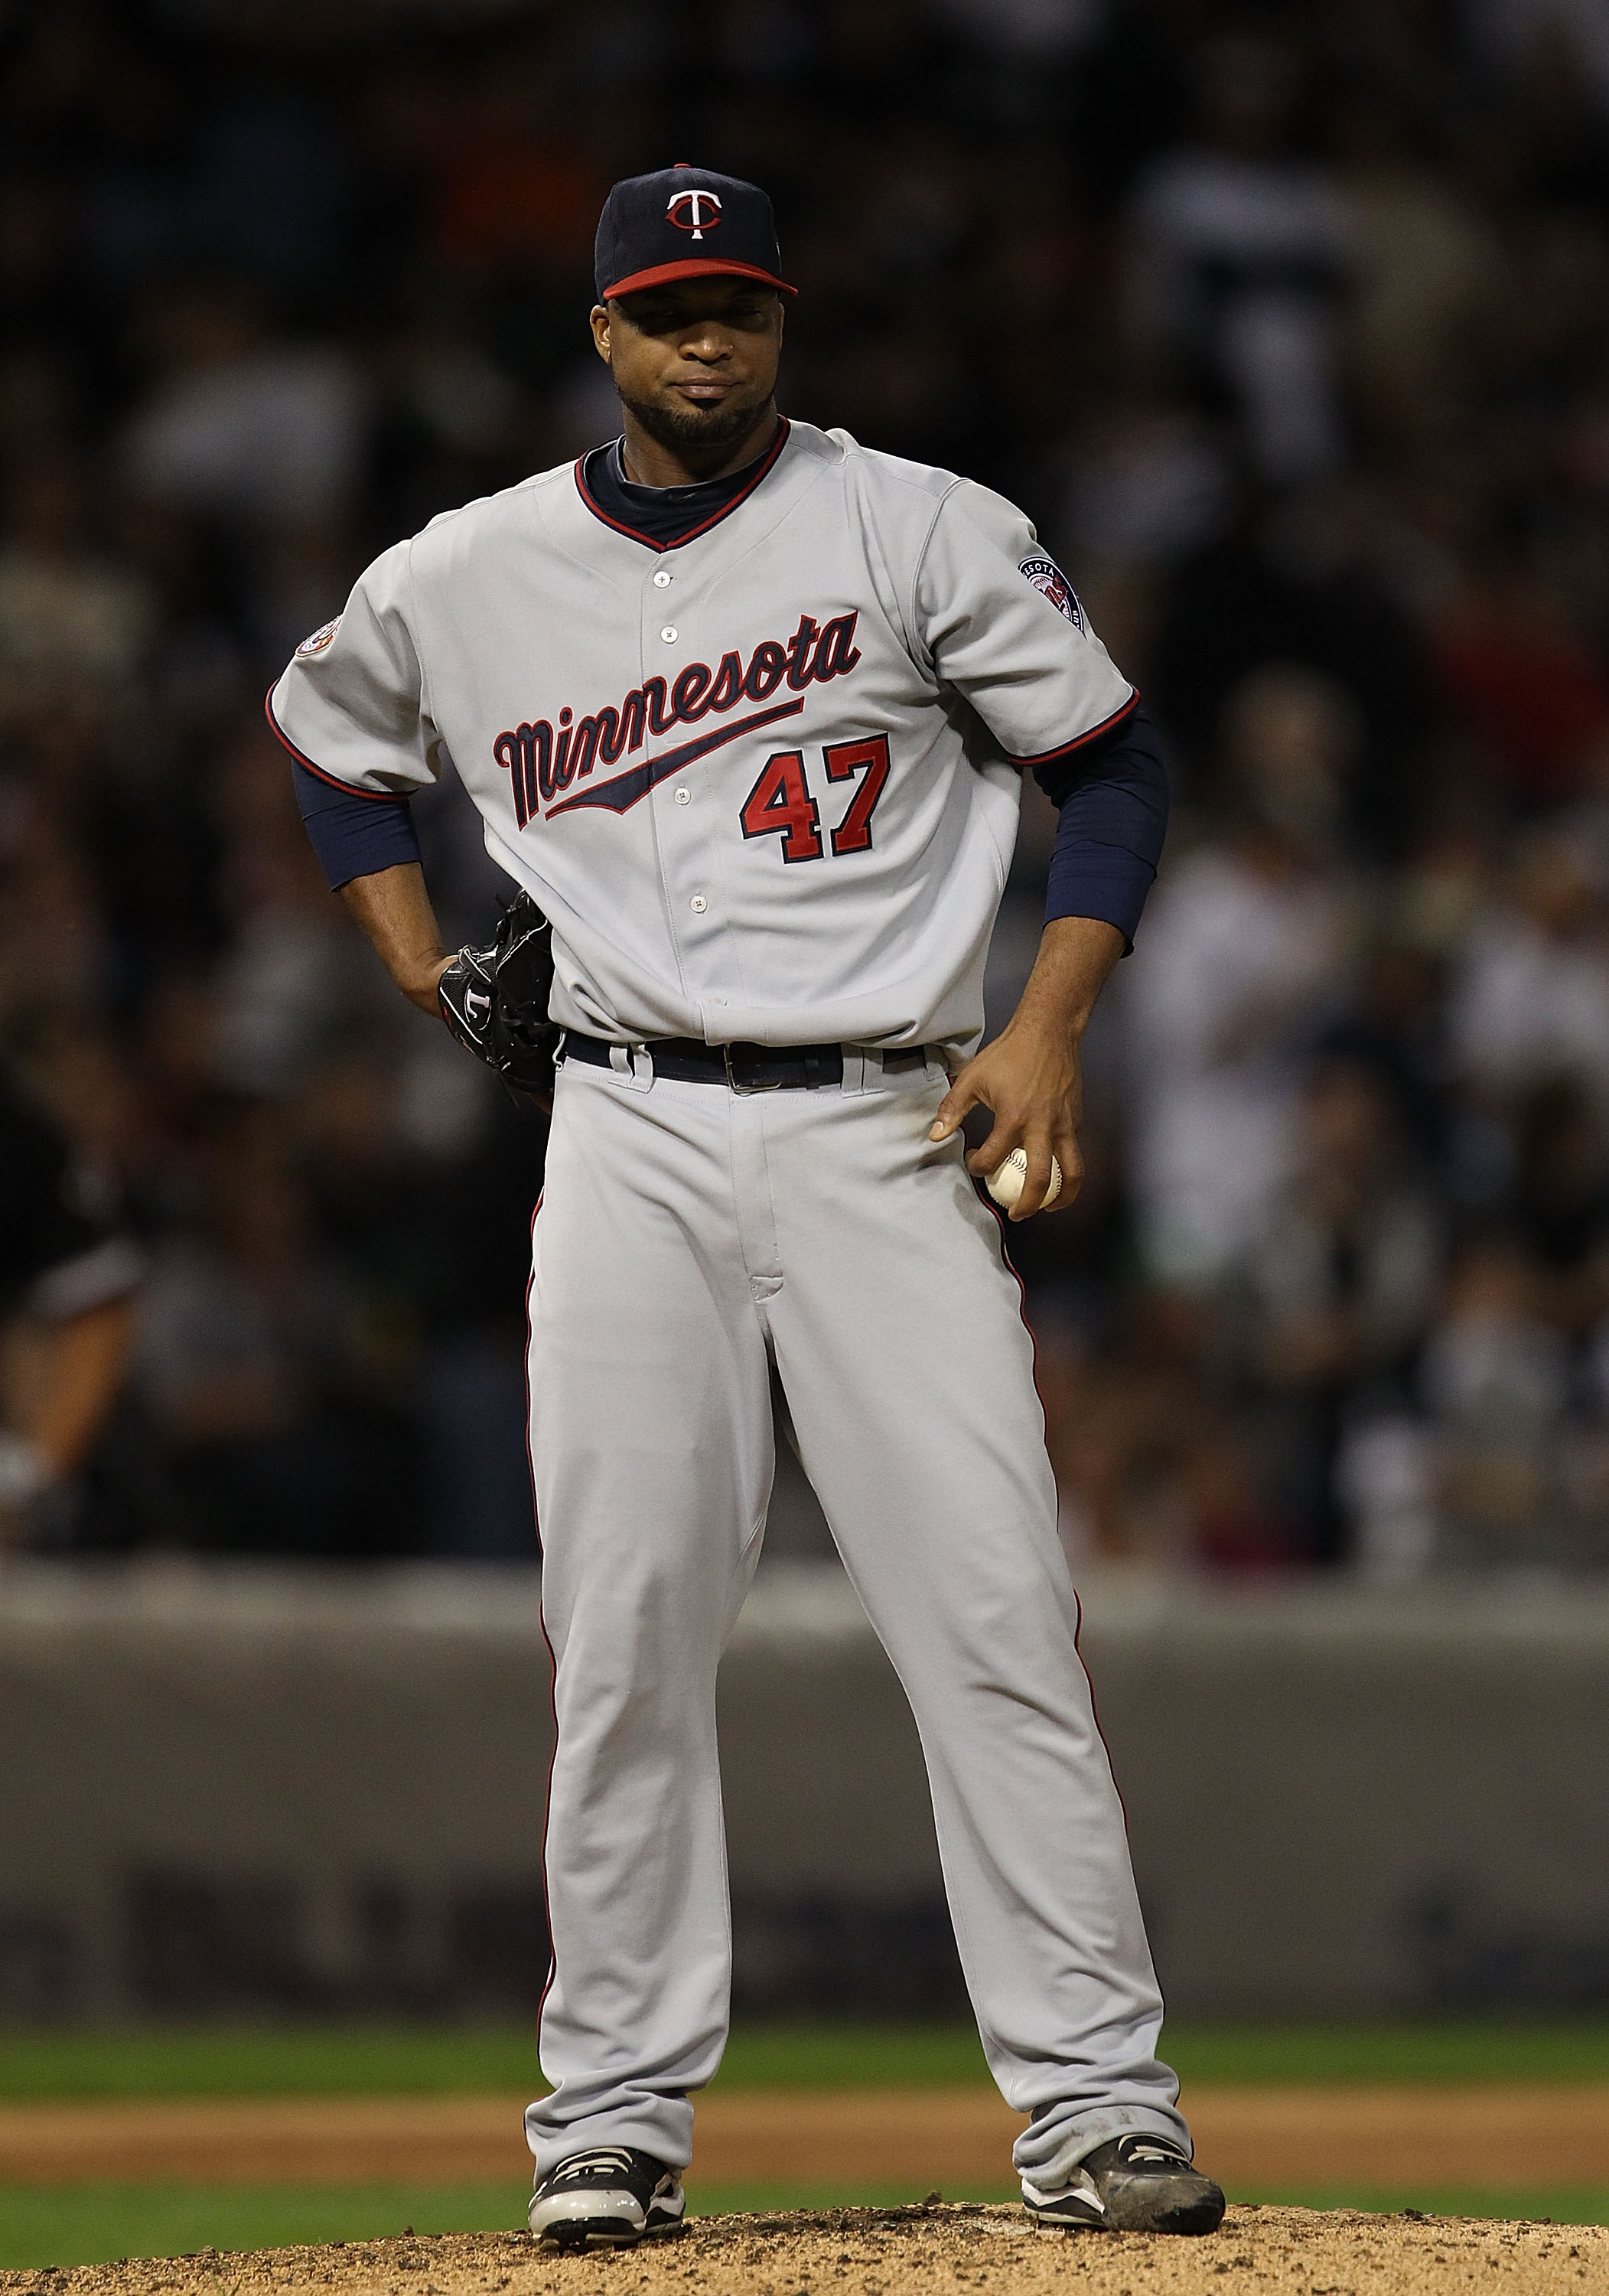 CHICAGO - SEPTEMBER 14: Starting pitcher Francisco Liriano #47 of the Minnesota Twins reacts after giving up a run to the Chicago White Sox at U.S. Cellular Field on September 14, 2010 in Chicago, Illinois. (Photo by Jonathan Daniel/Getty Images)